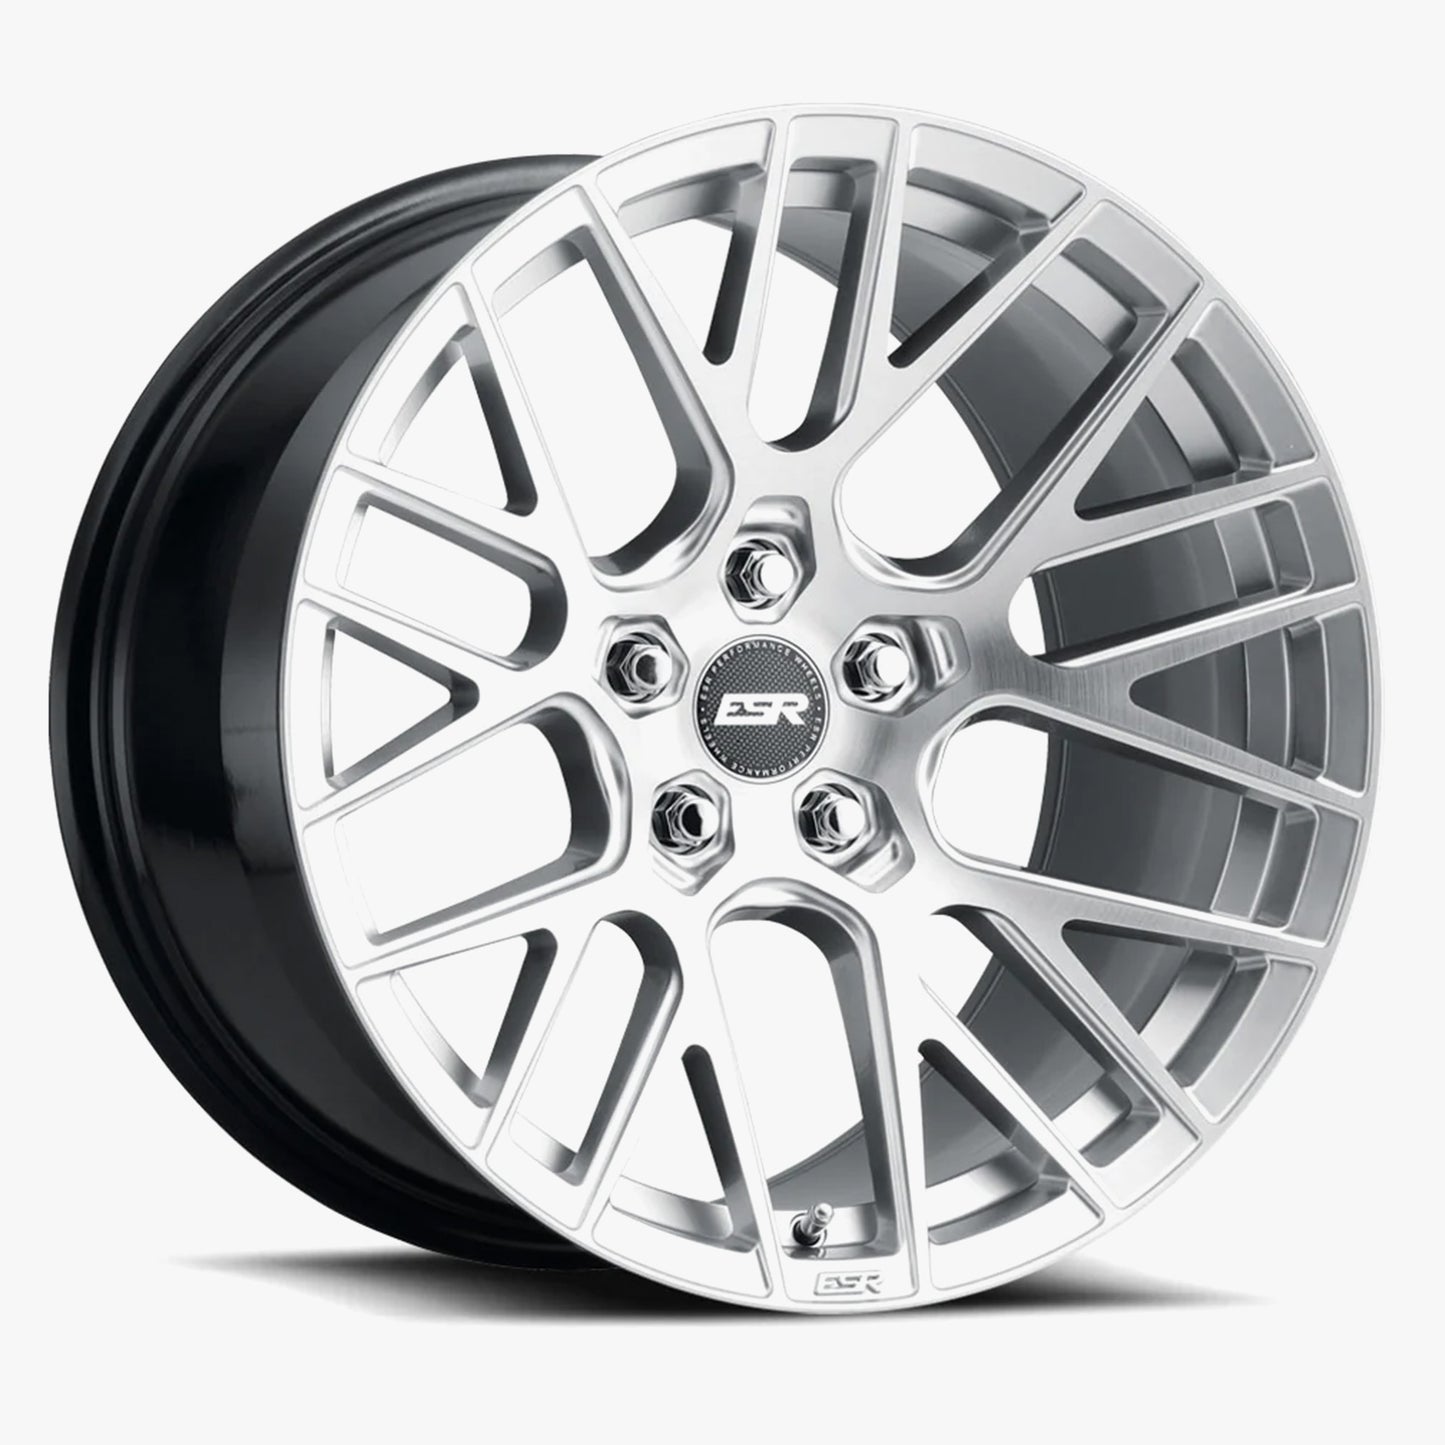 FORGETECH SERIES RF11 Brushed Hyper Silver Brushed Hyper Silver 18x10.5 +22 5x105 (Custom Drill)